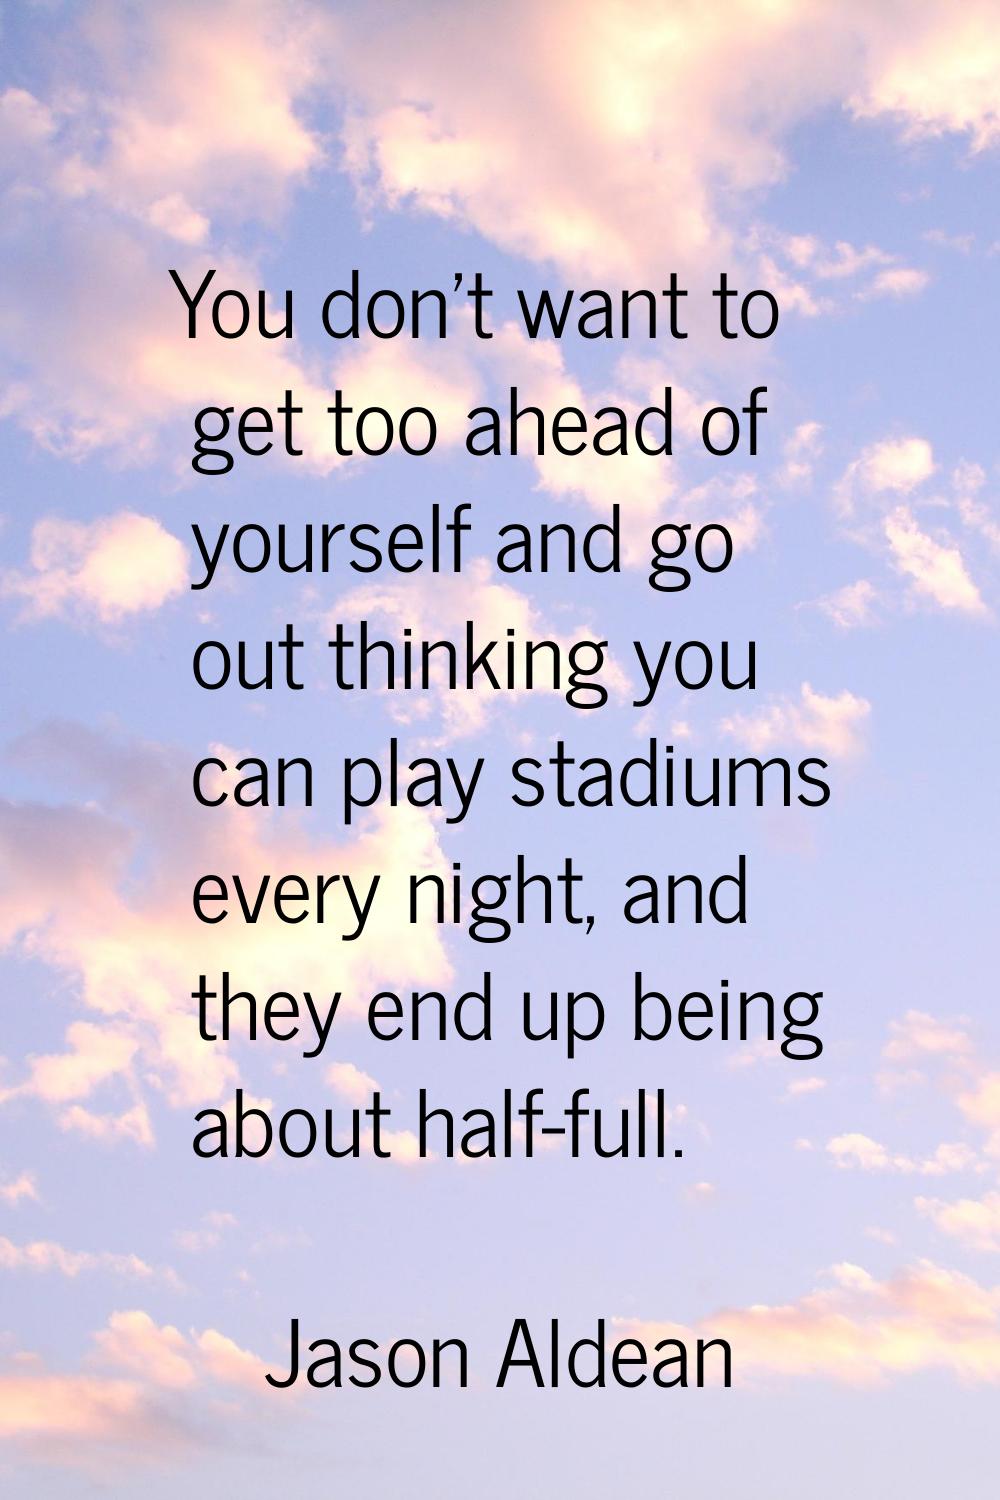 You don't want to get too ahead of yourself and go out thinking you can play stadiums every night, 